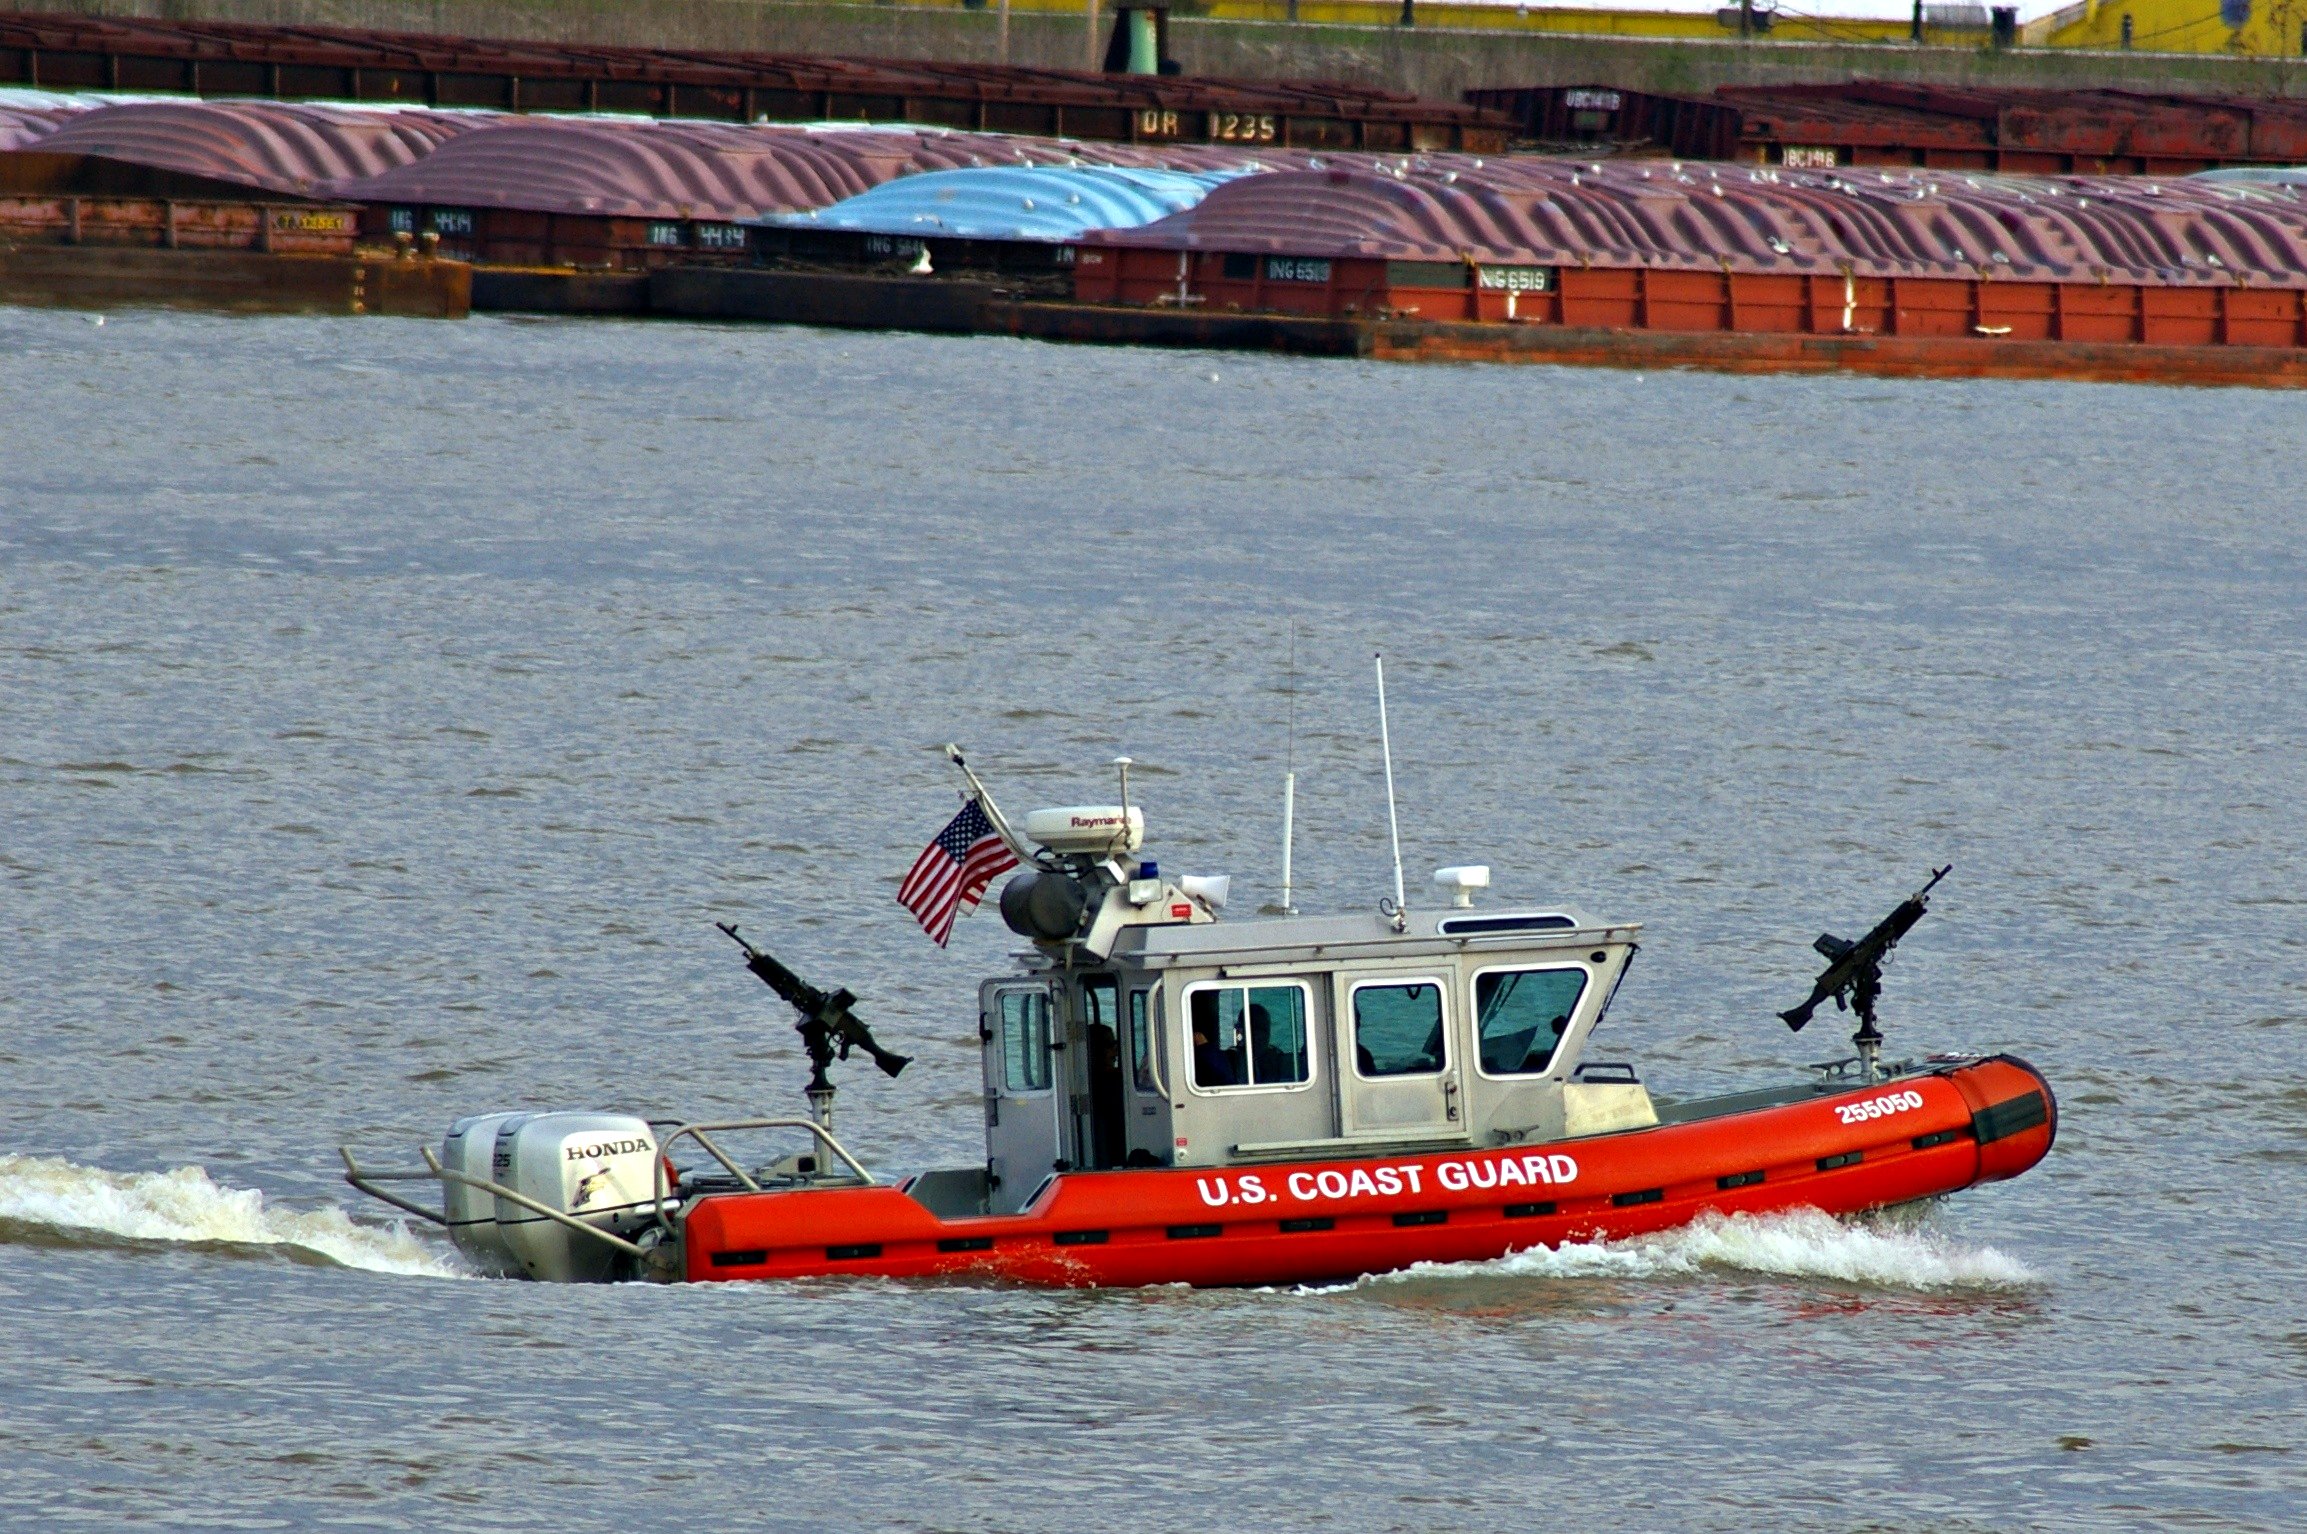 a coast guard boat on the water with two birds on it